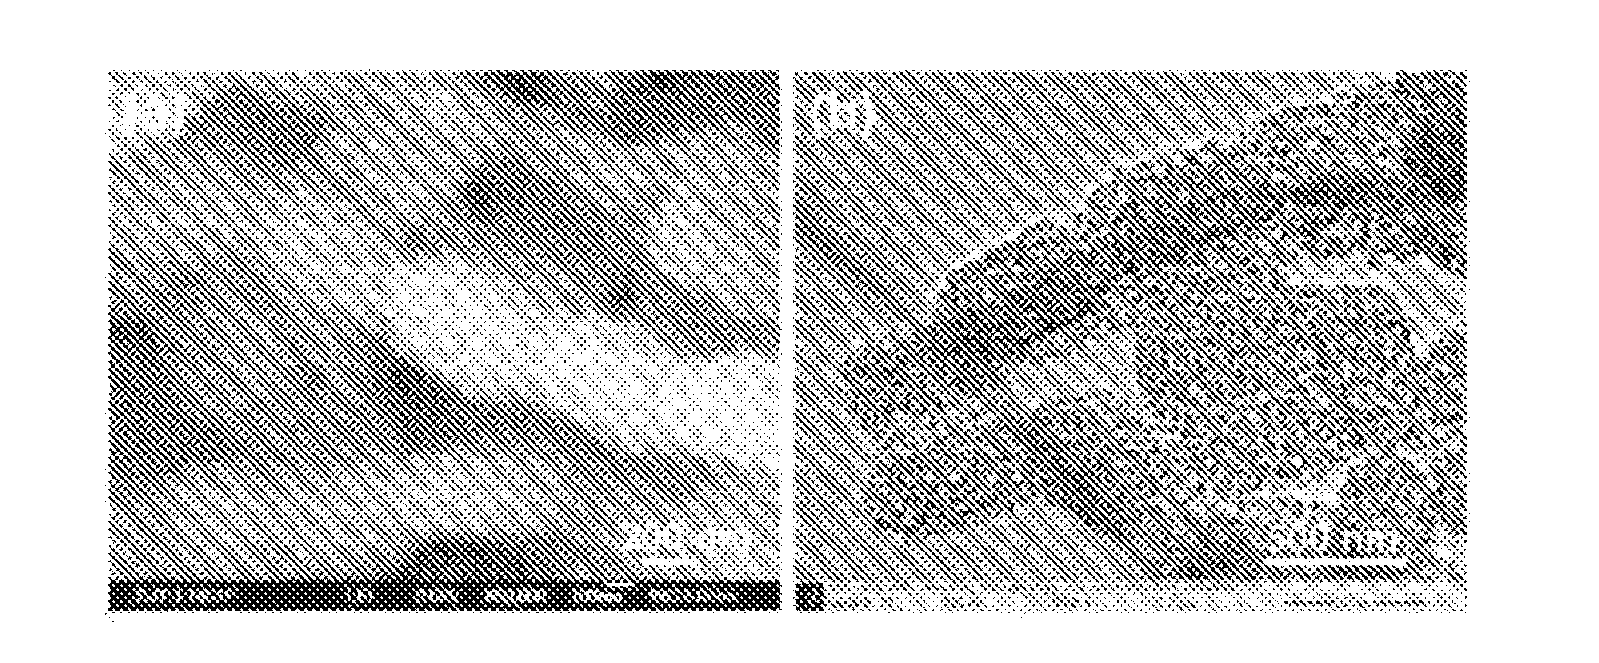 Silicon-carbon Composite Anode Material for Lithium Ion Batteries and A Preparation Method Thereof